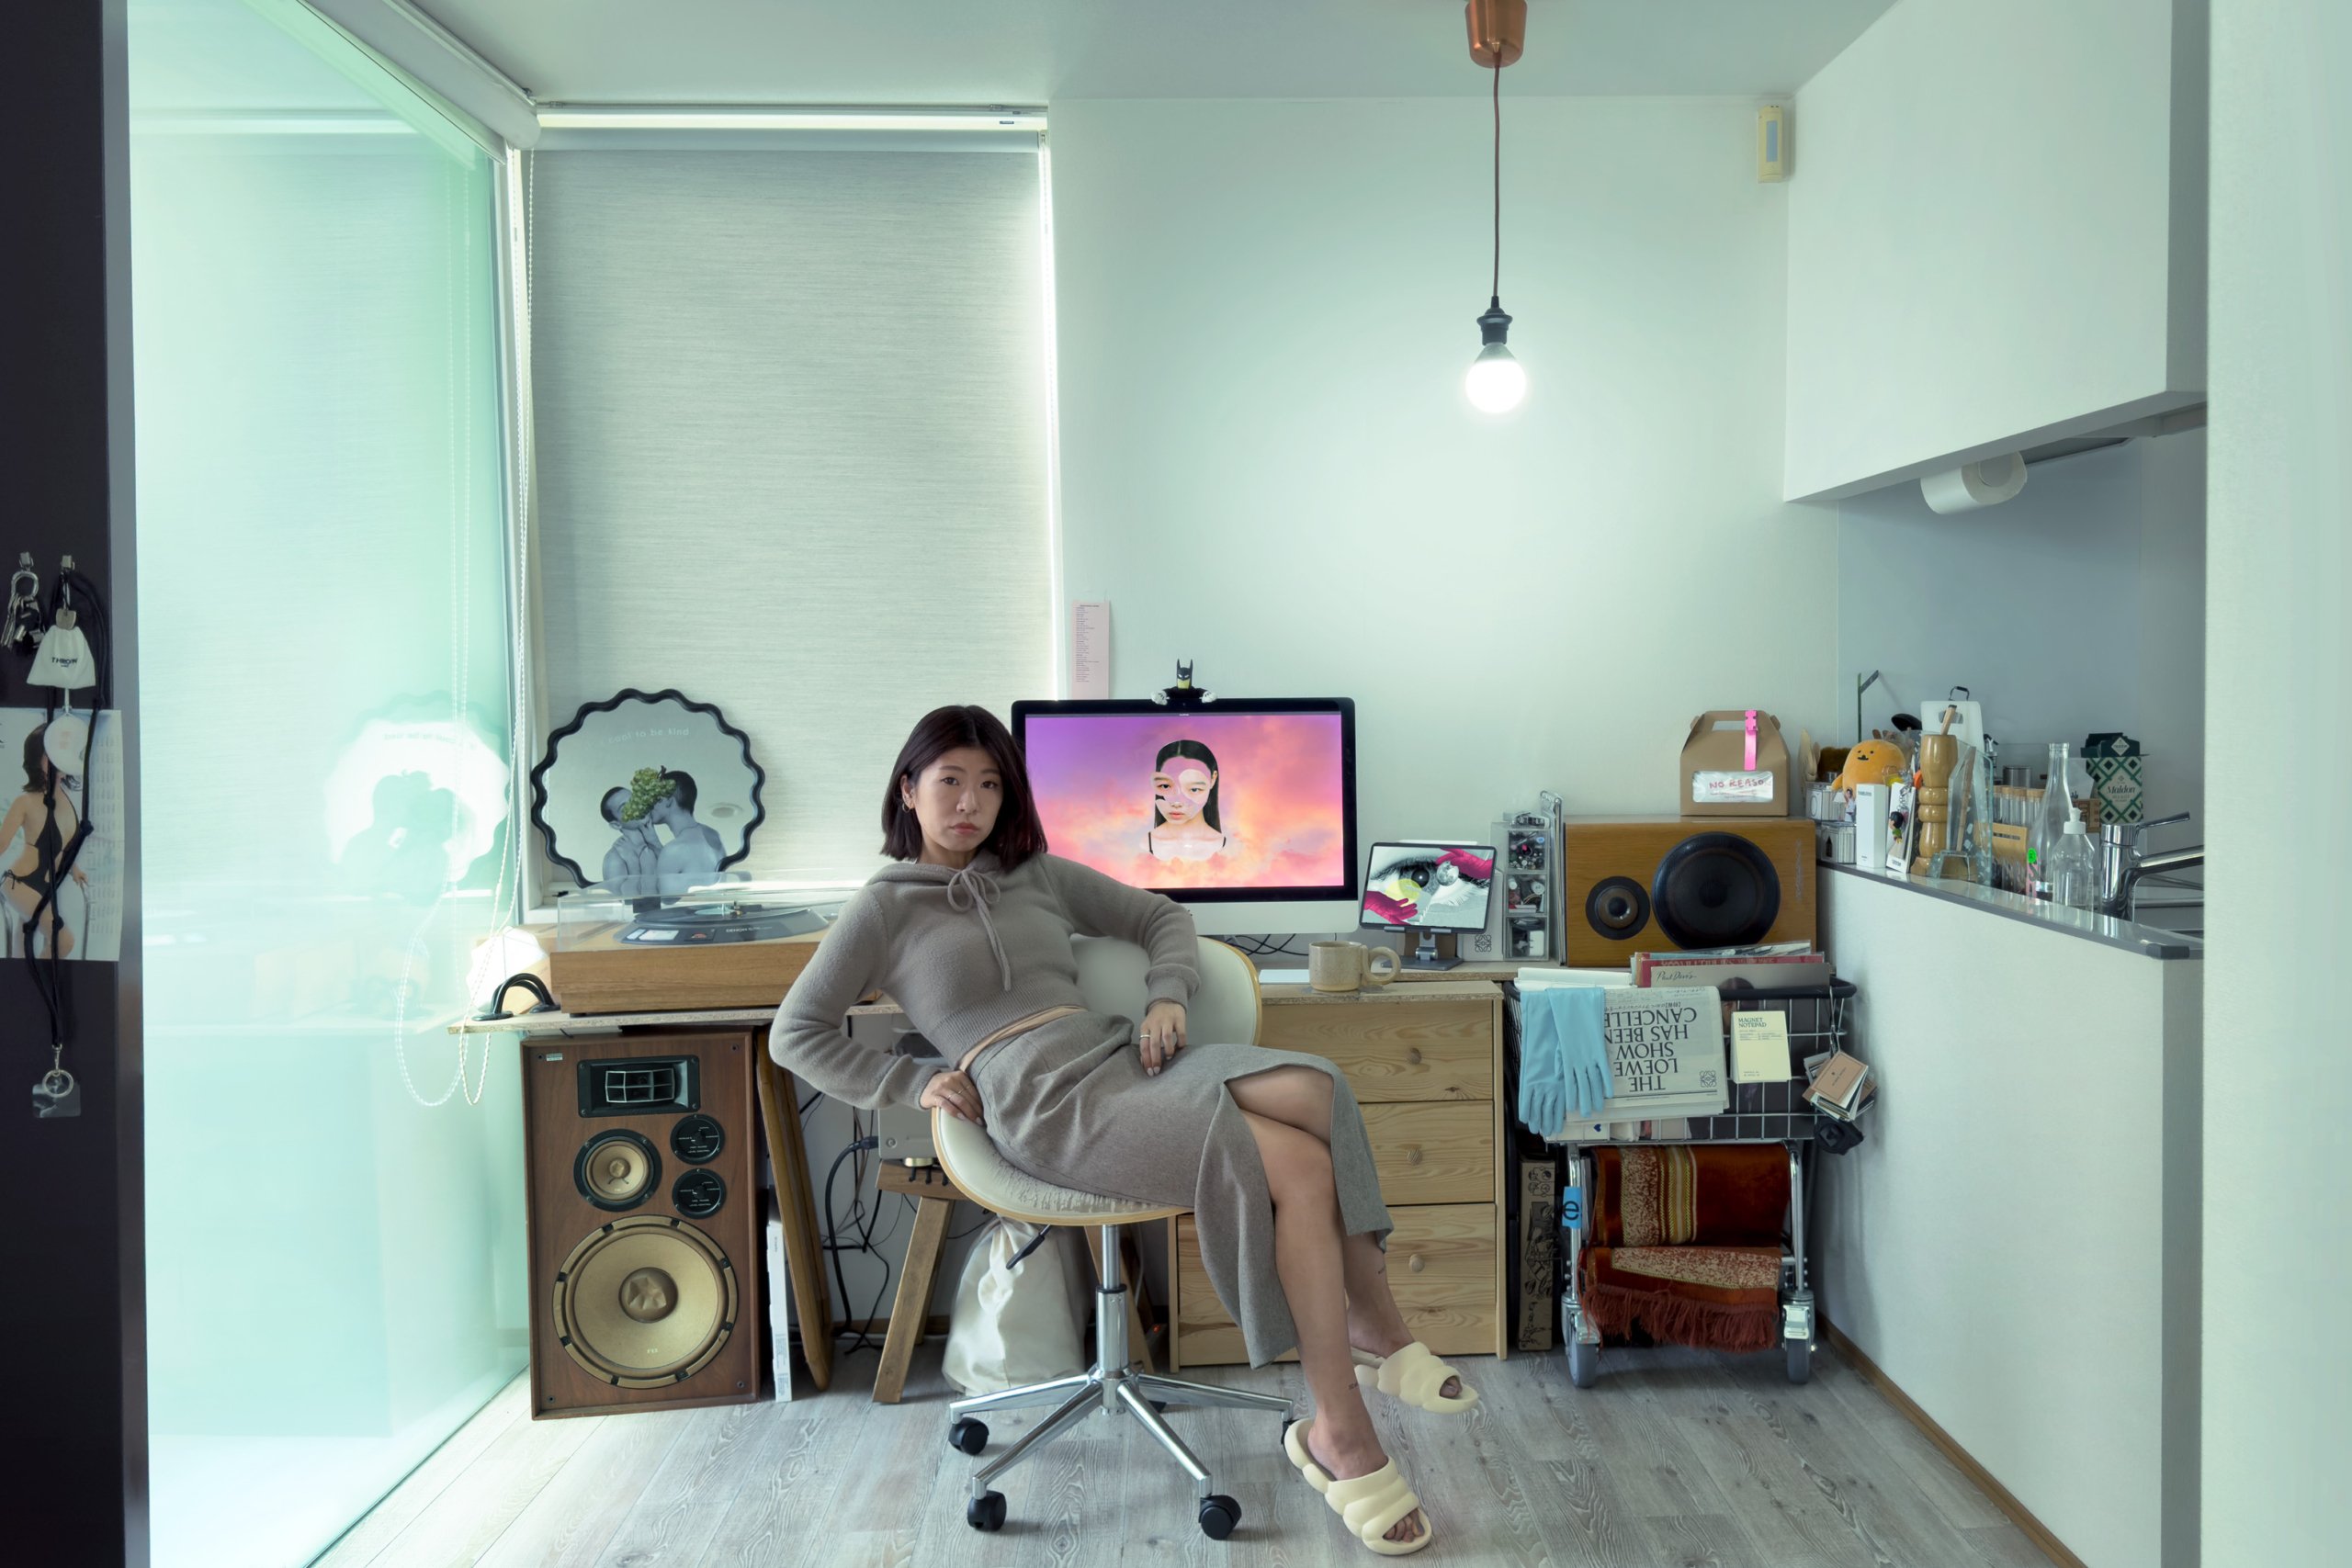 Manami sitting on a chair in front of her large desk where she has her computer, vinyl player and large speakers.